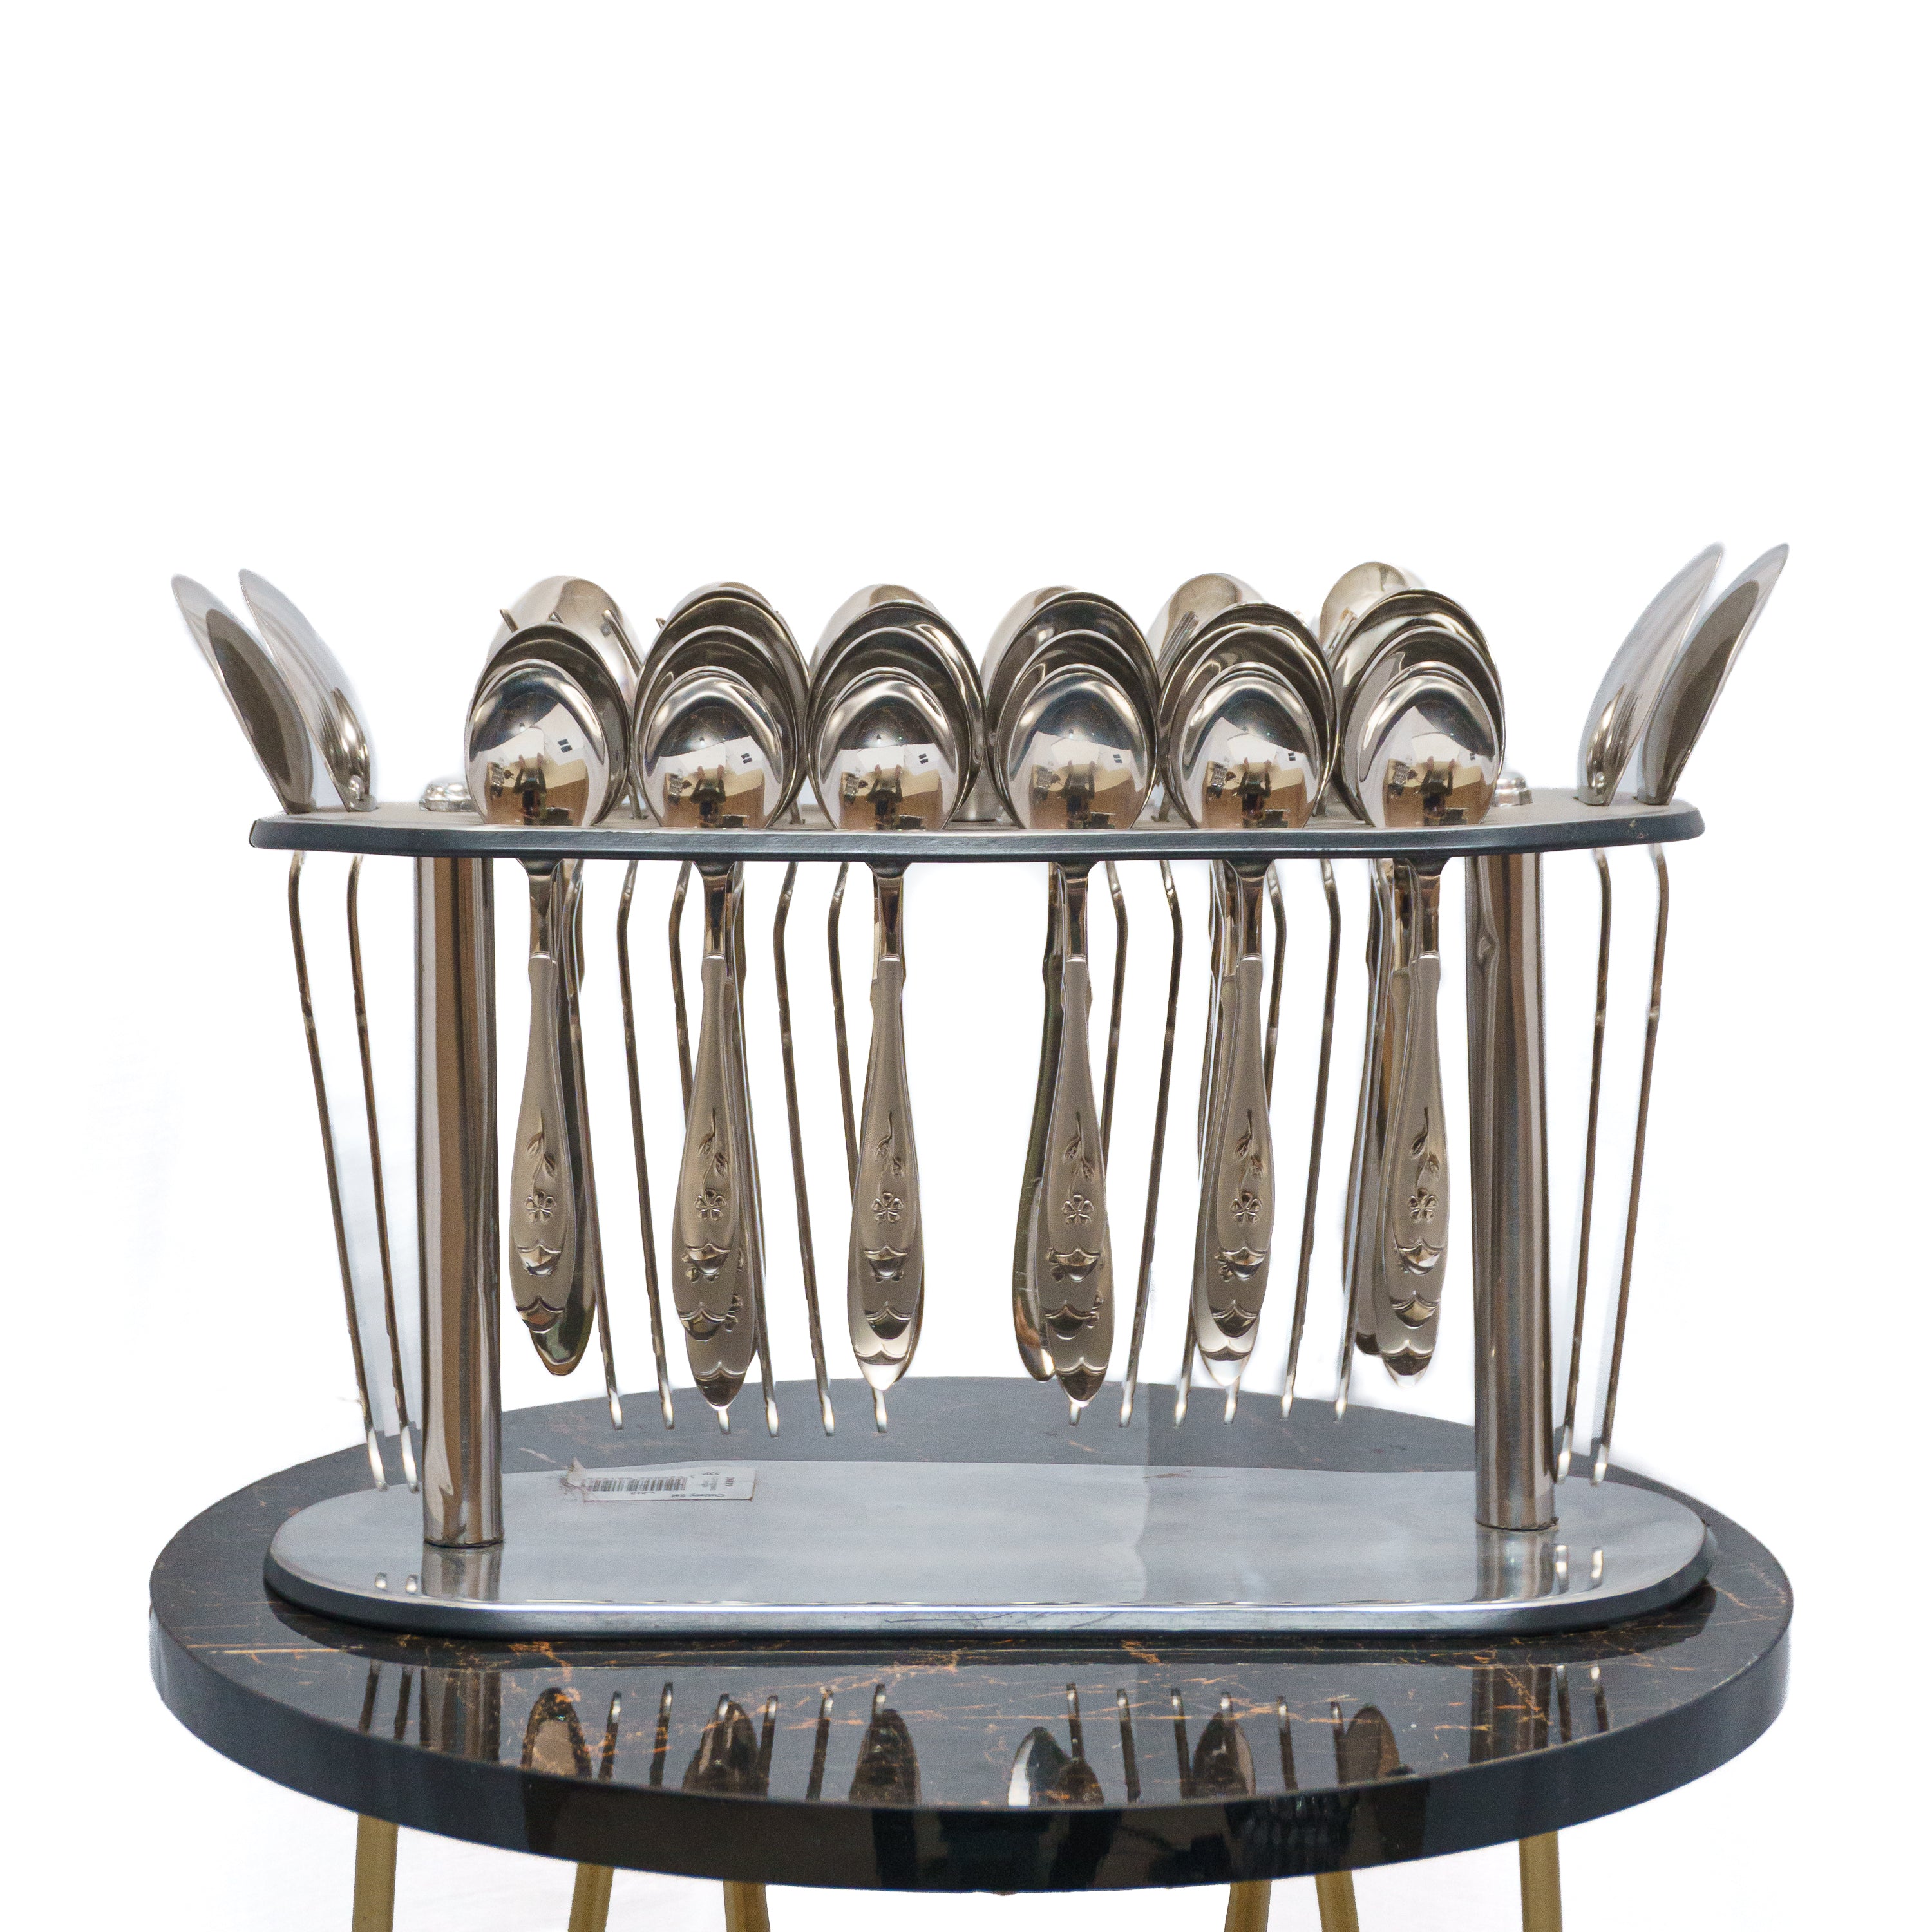 Floral Elegance: High-Quality Stainless Steel Spoon Set with Intricate Design